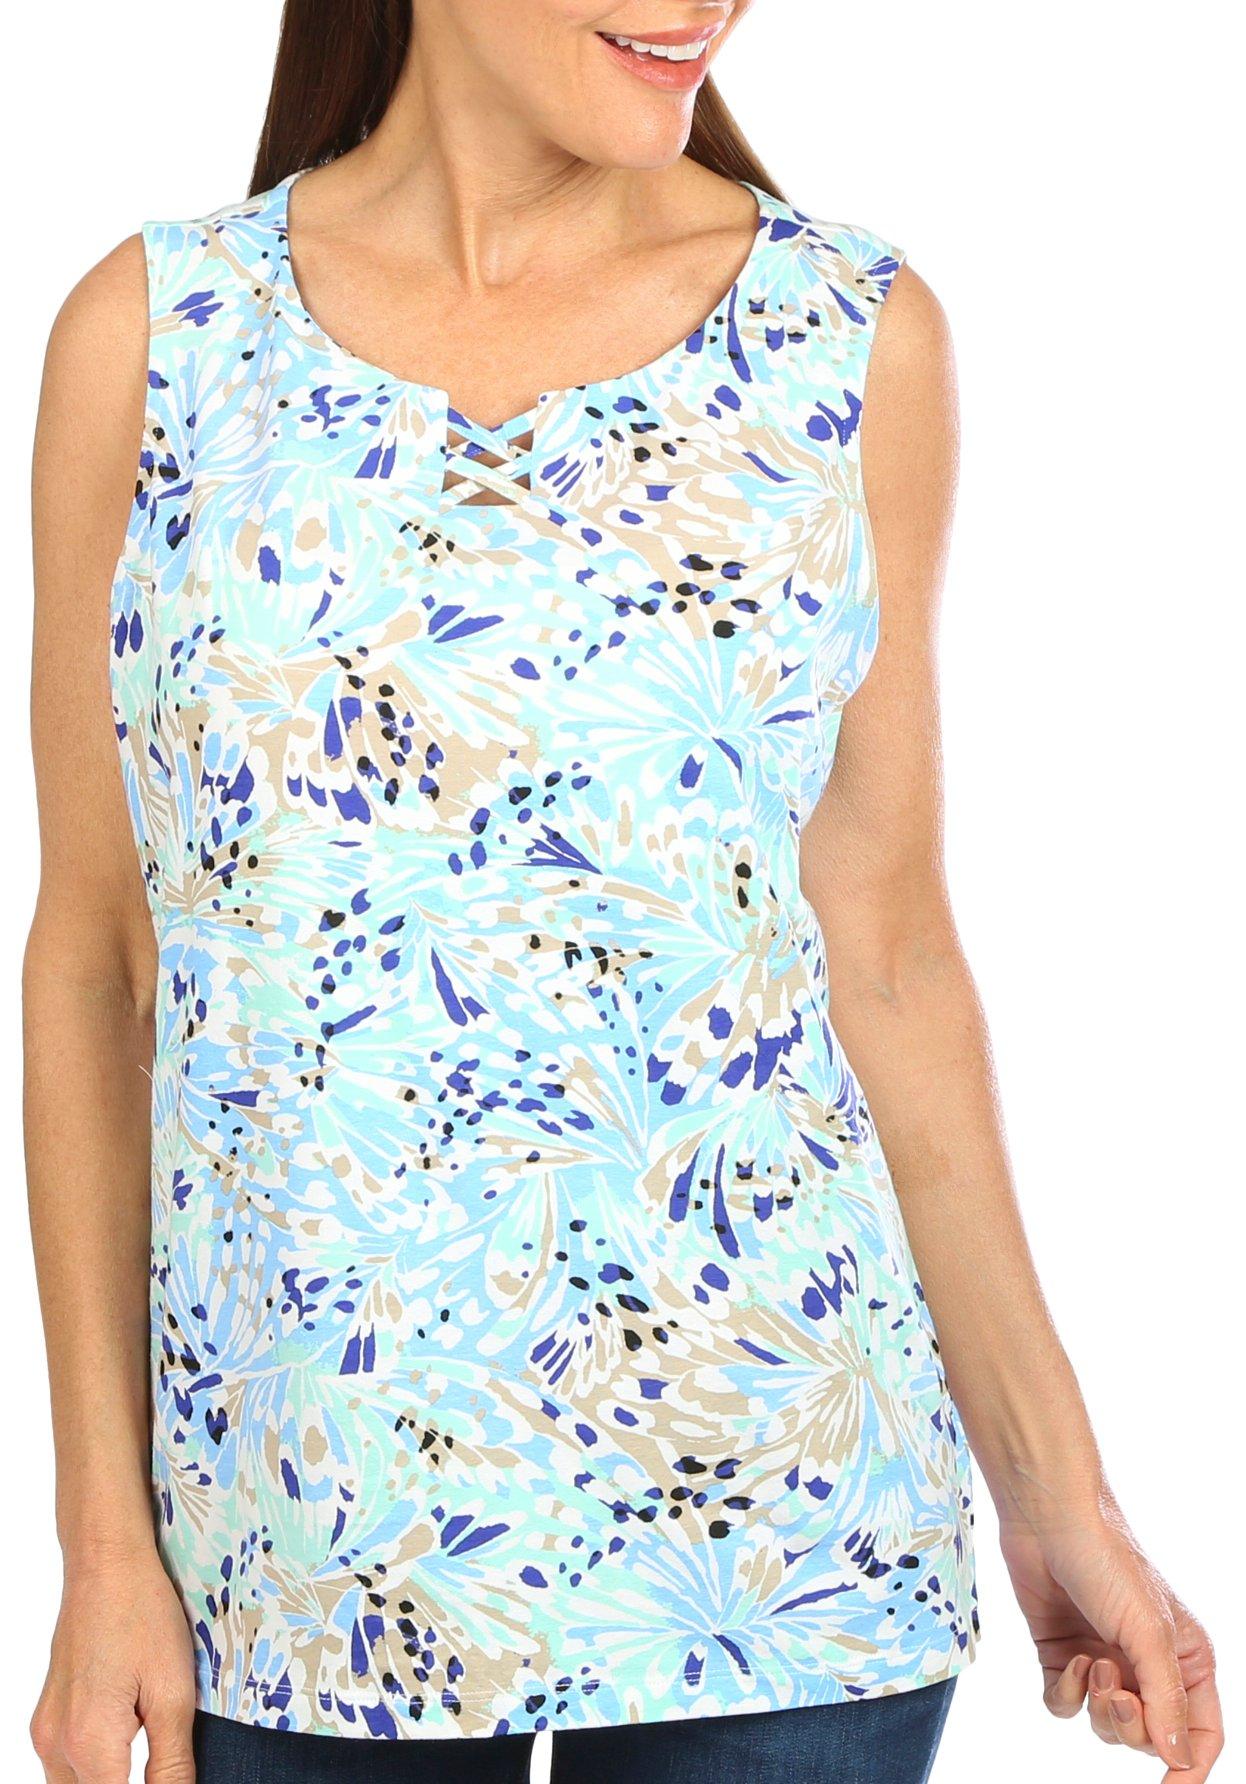 Coral Bay Womens Criss Cross Butterfly Print Sleeveless Top